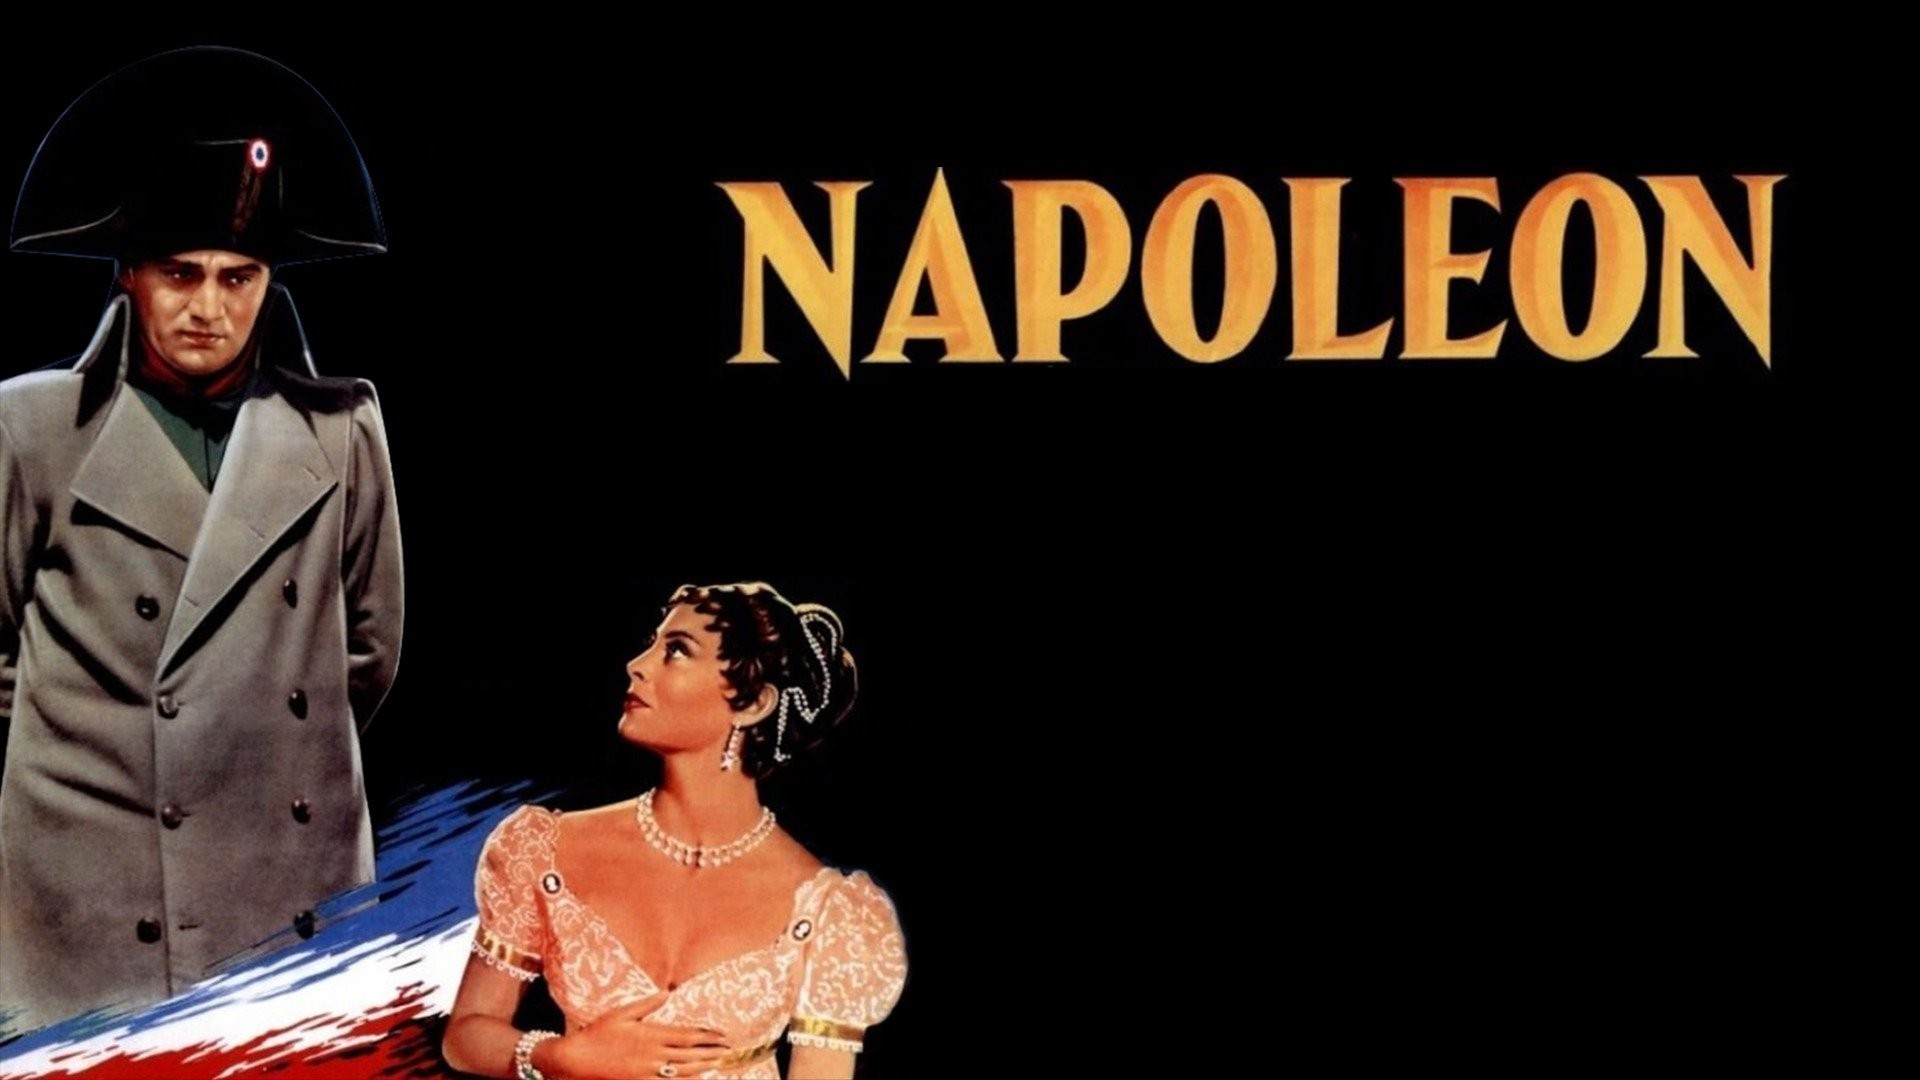 Napoleon Debuts On Rotten Tomatoes With Promising Score!